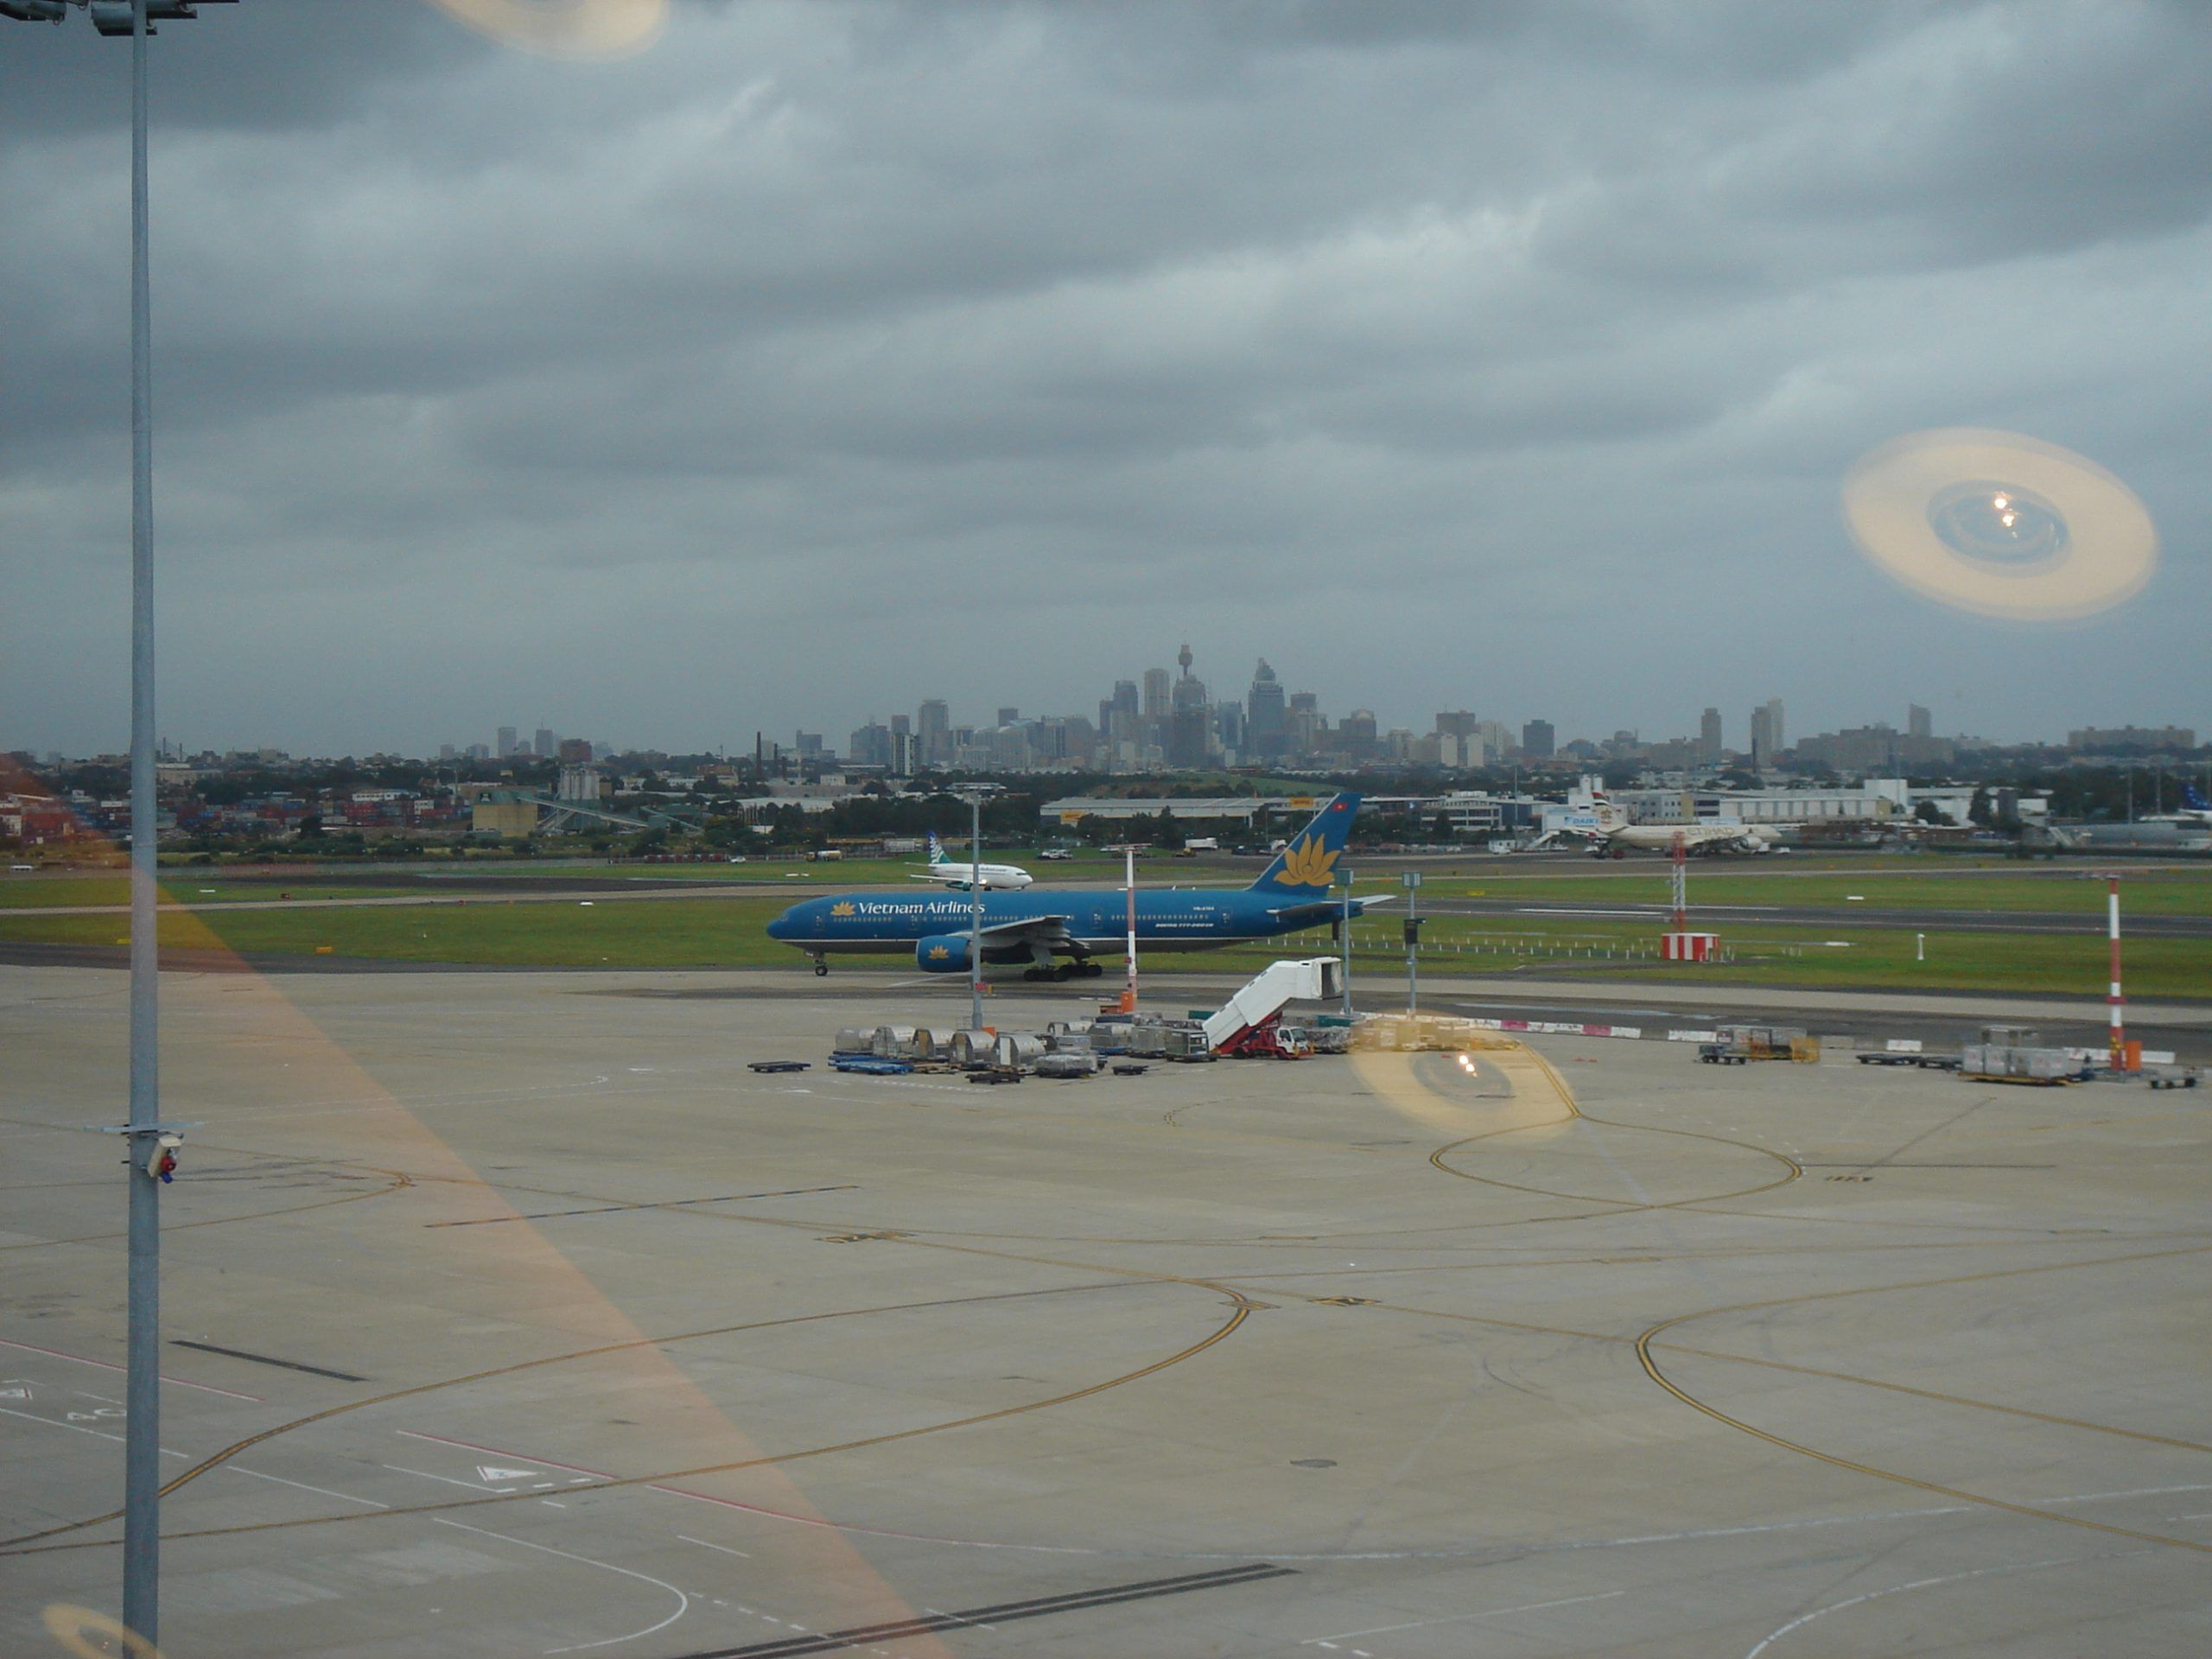 A view out the window of the Qantas lounge. There is a blue Vietnam Airlines plane sitting on the tarmac in the distance.